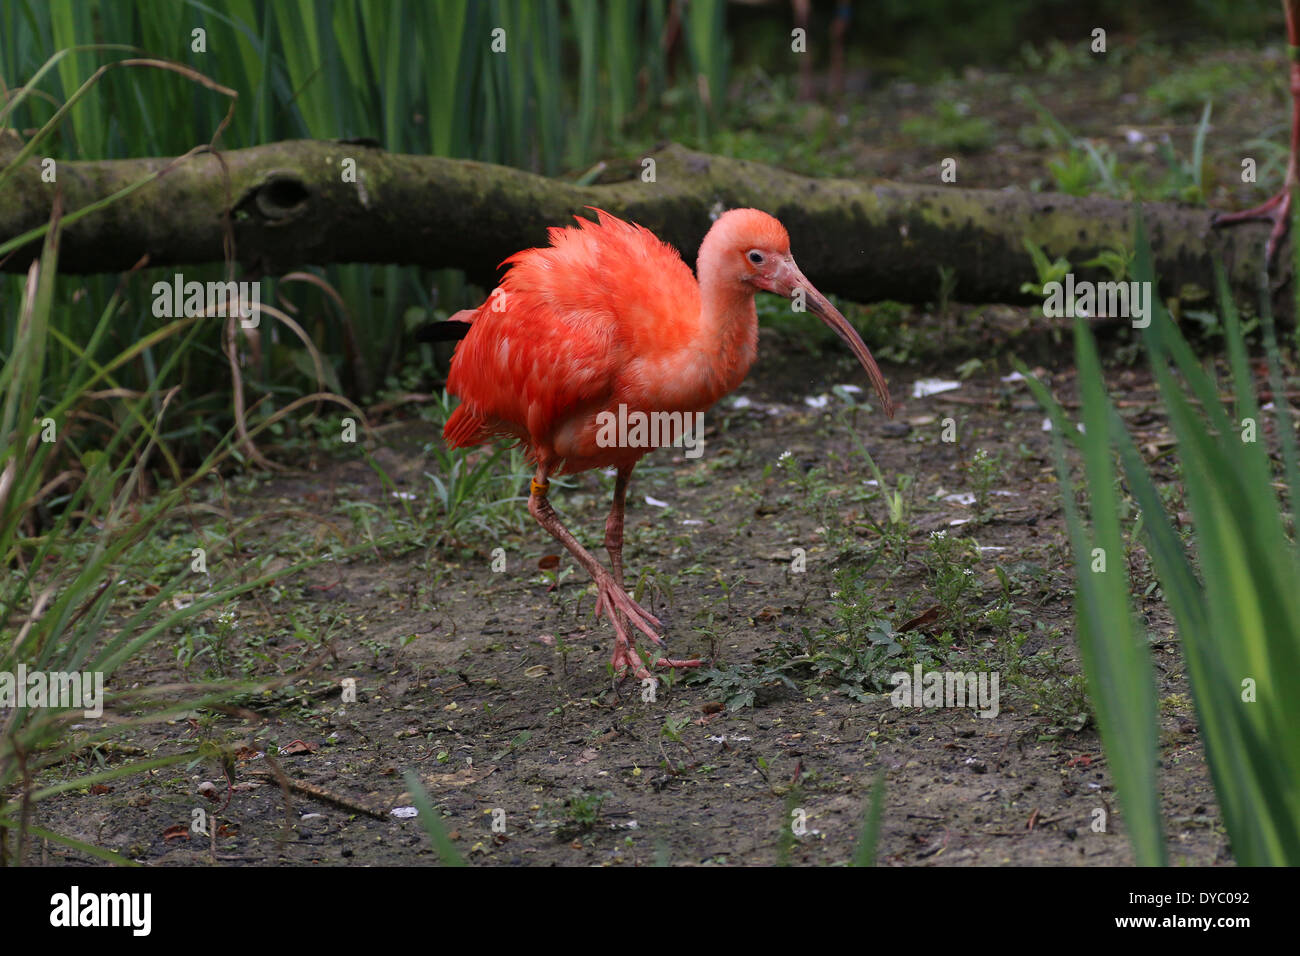 Close-up of a Scarlet Ibis (Eudocimus ruber) walking and foraging Stock Photo